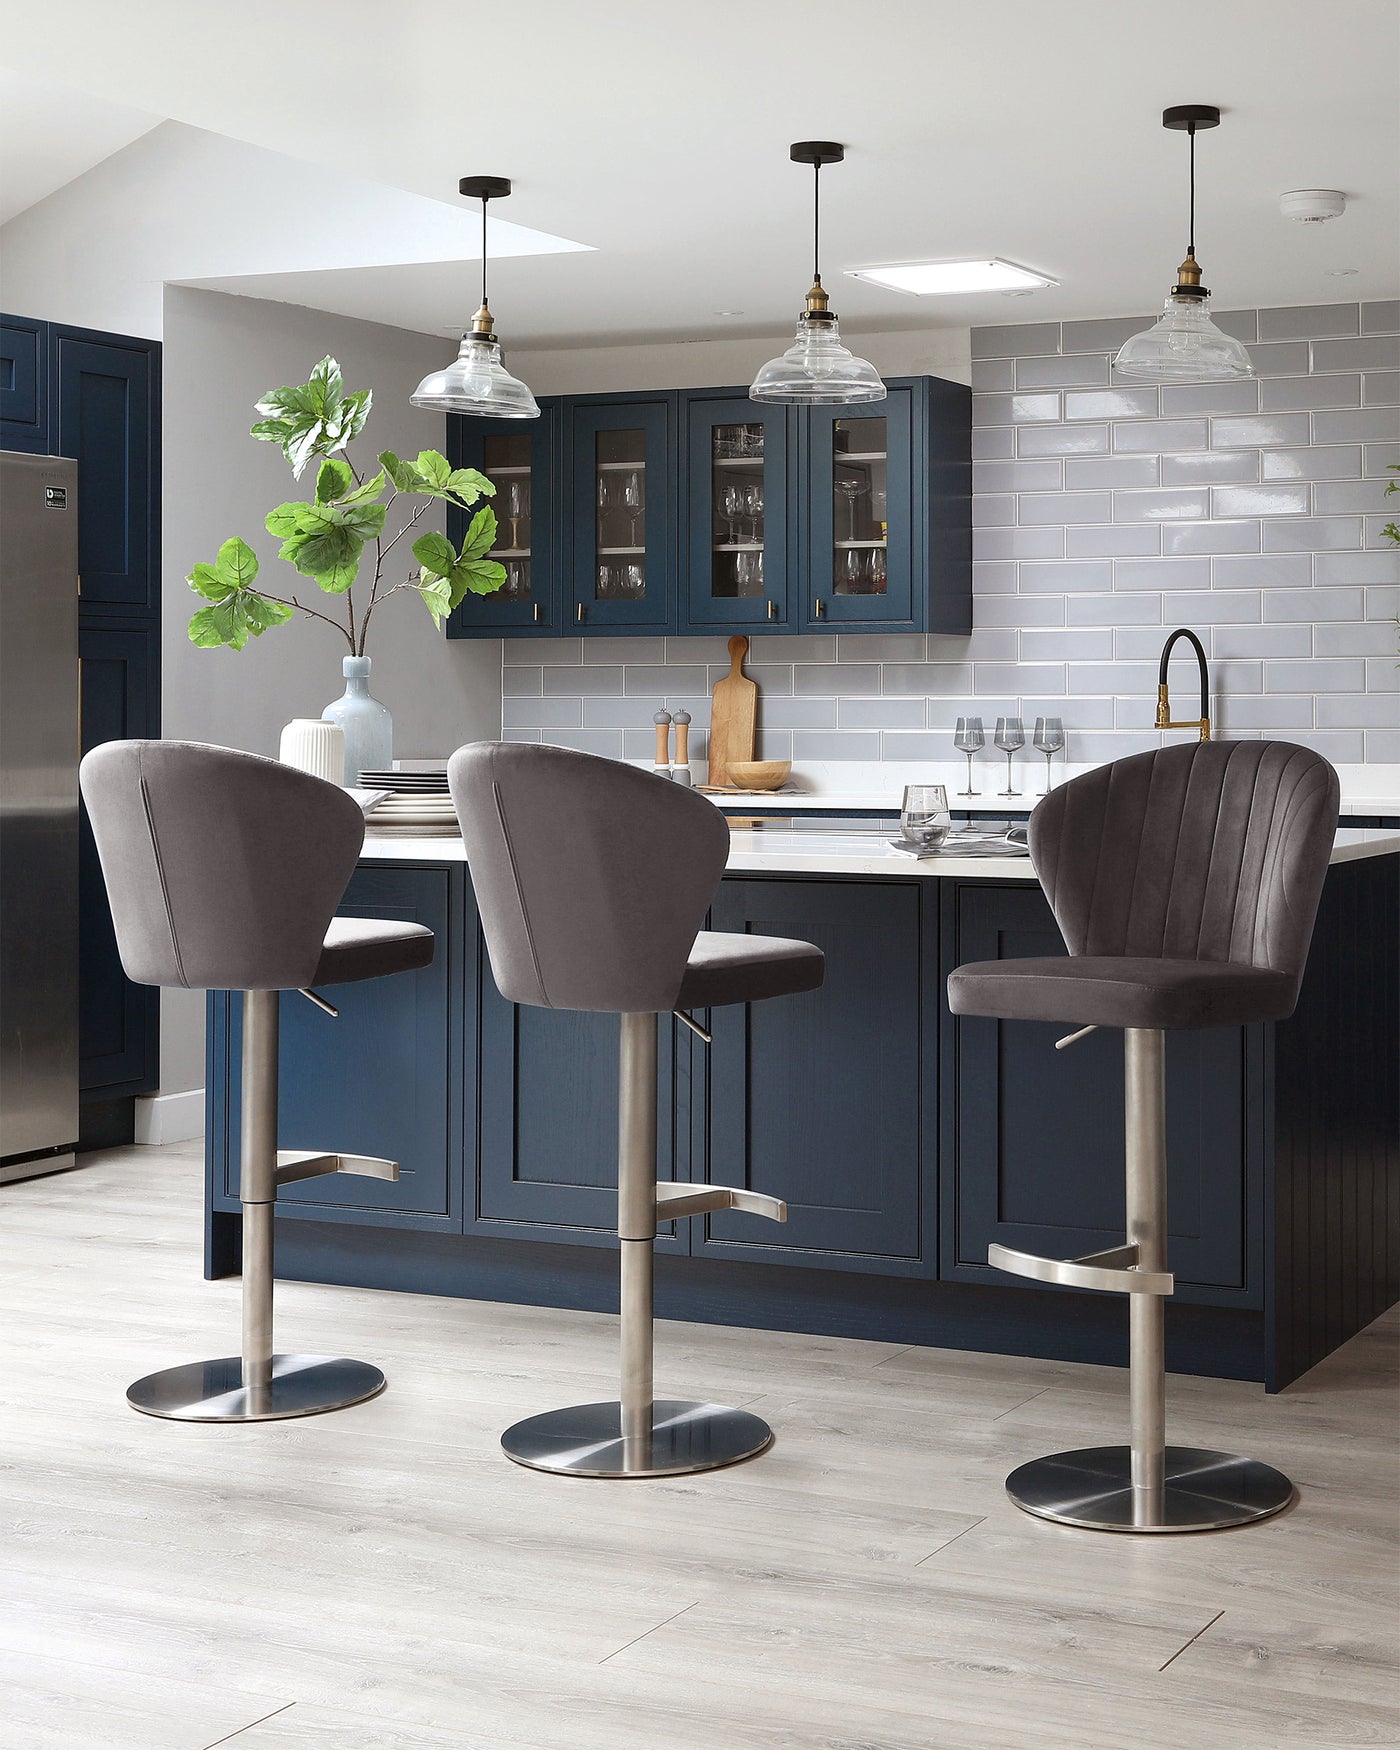 Three modern bar stools with grey upholstery and padded seats, featuring high-backs with channel tufting. These stools have sleek, adjustable metal bases with built-in footrests, giving off a contemporary aesthetic perfect for kitchen islands or home bars.